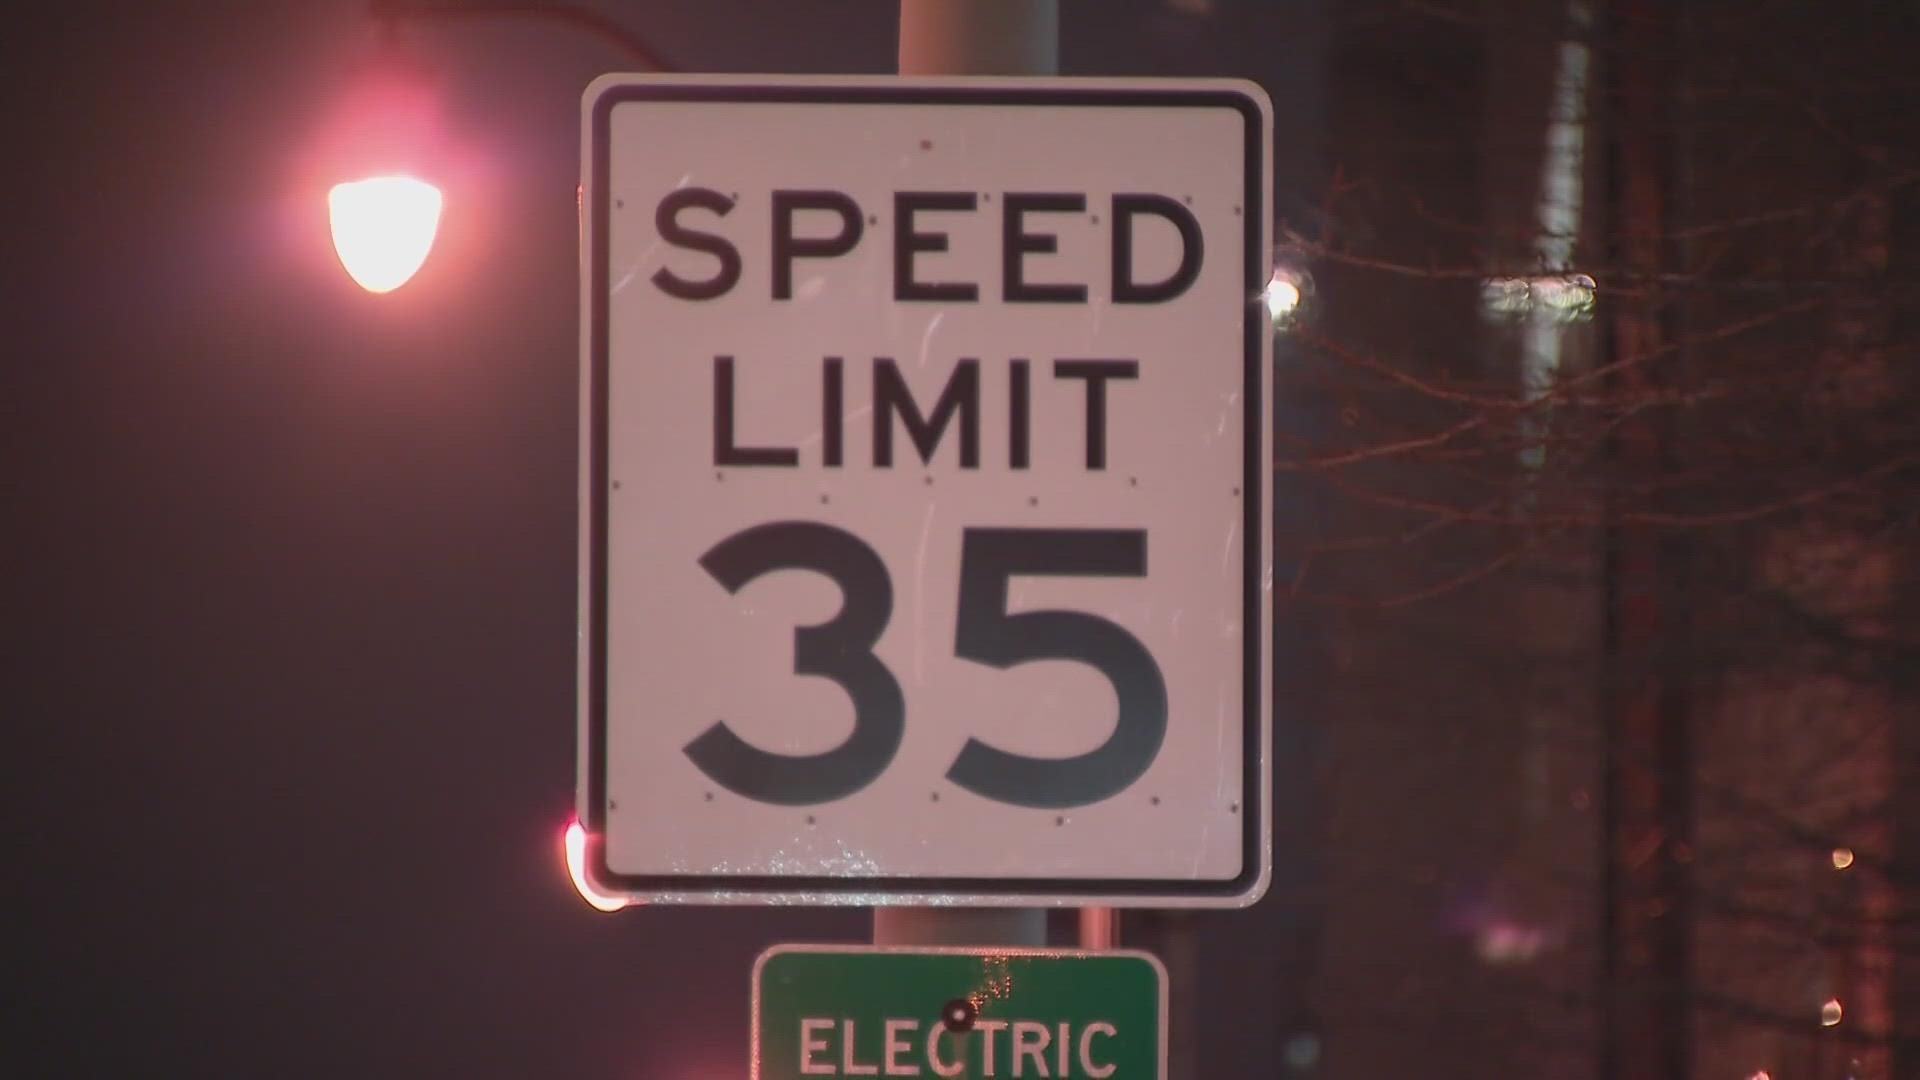 The current speed limit on many major downtown streets is 35 miles per hour, but will soon be lowered to 25 mph.